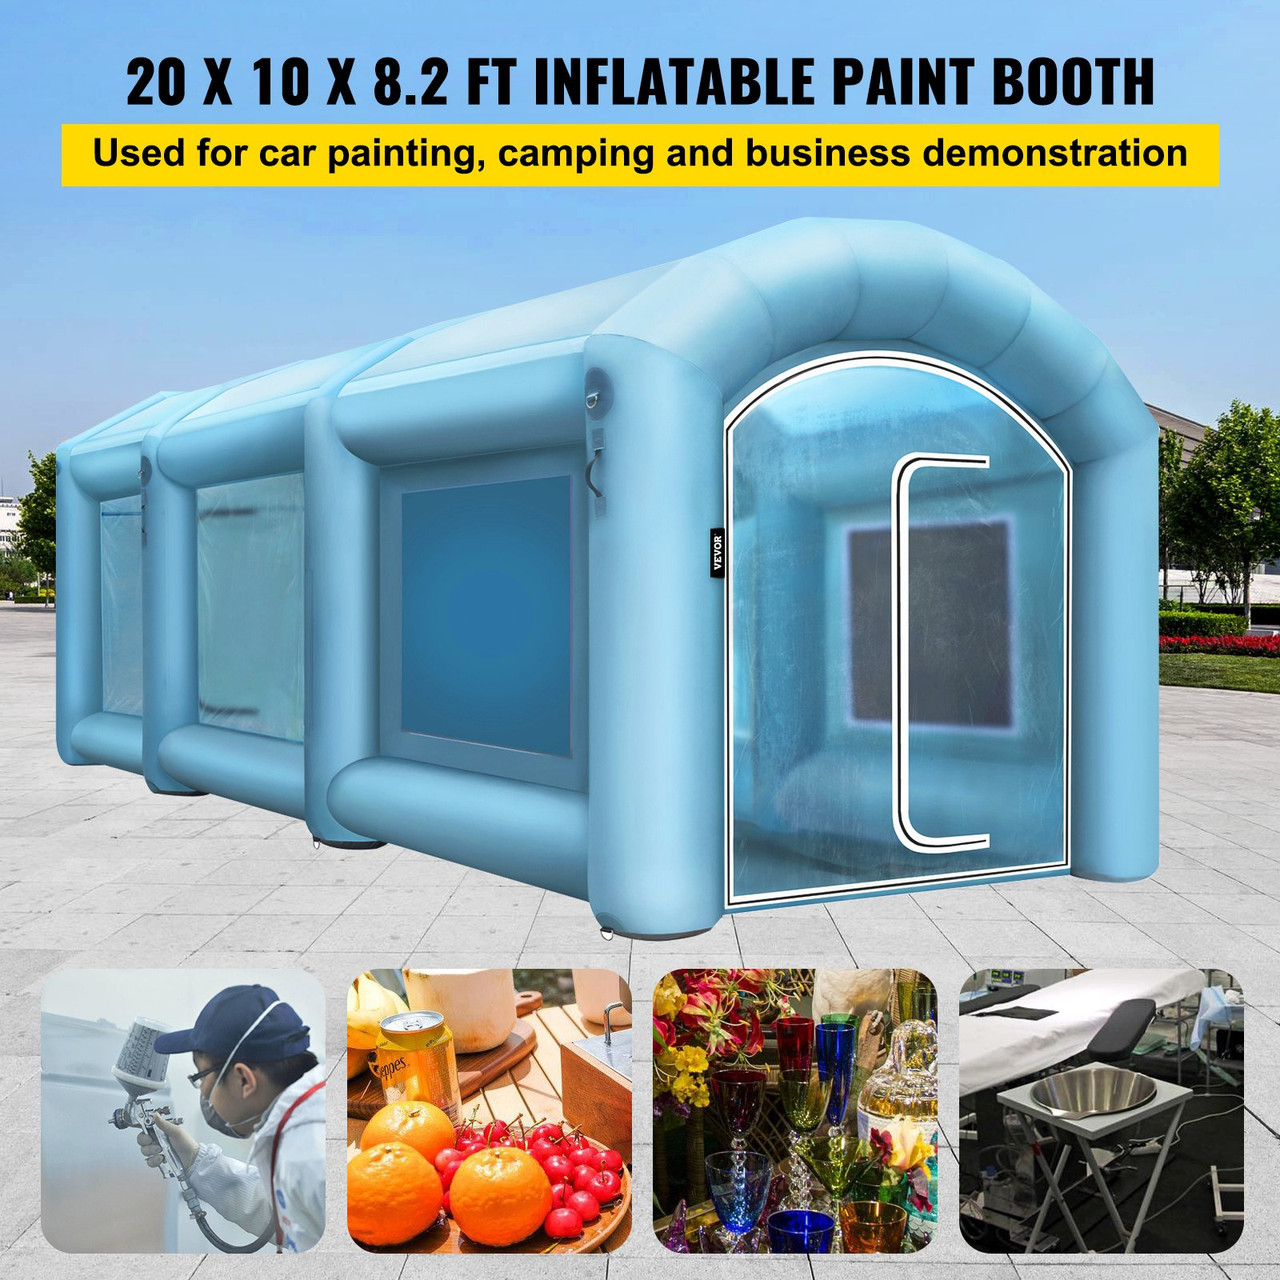 Inflatable Paint Booth, 20x10x 8 ft Spray Paint Booth, High Powerful 750W+350W Blowers Inflatable Spray Booth with Air Filter System Portable Car Paint Booth for Car Parking Tent Workstation